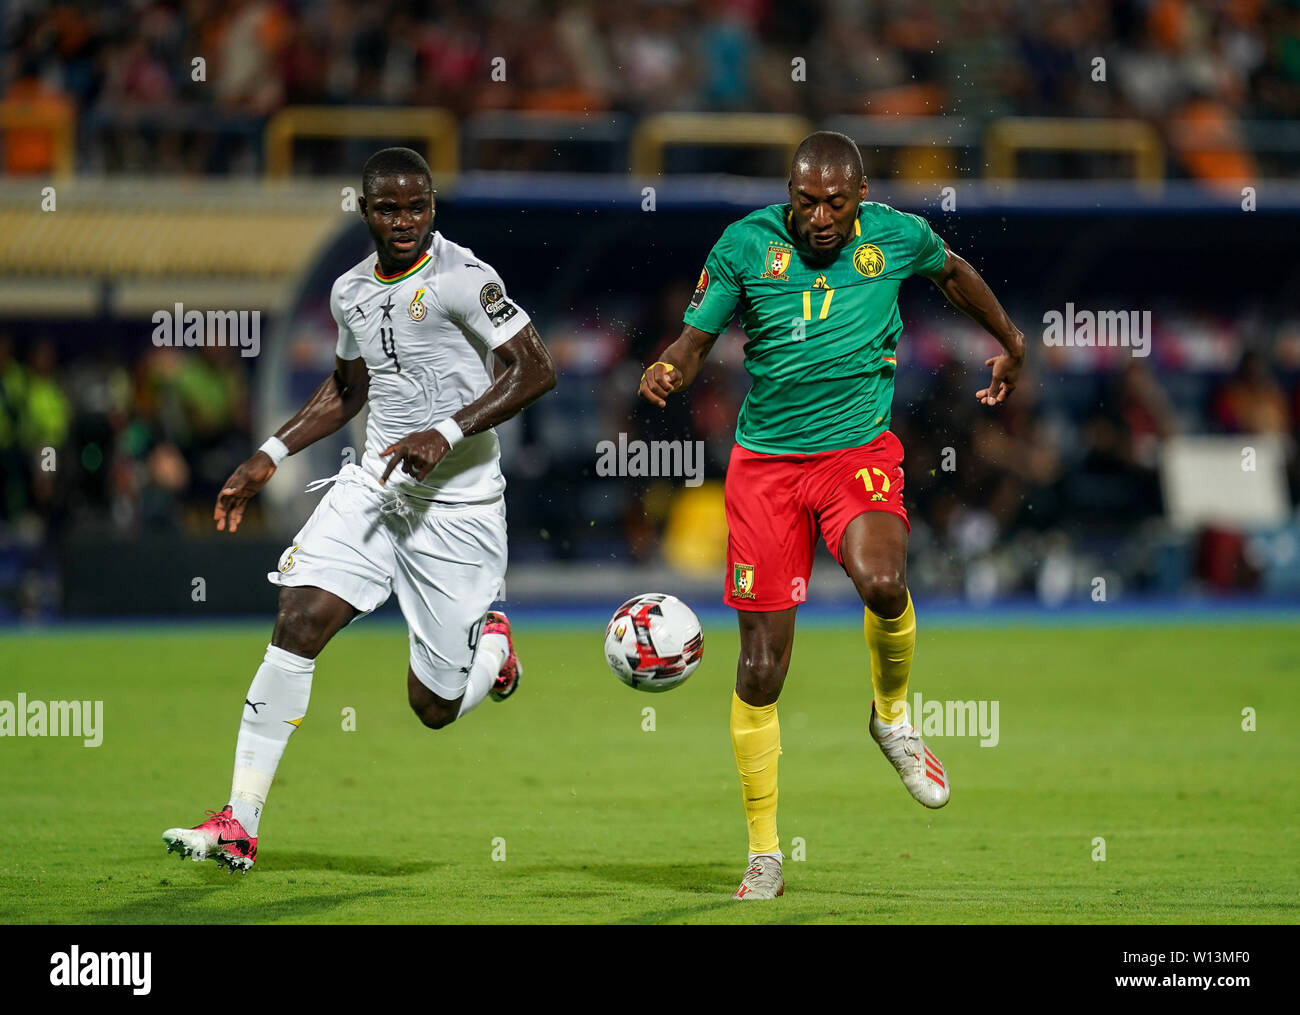 Ismailia, Egypt. 29th June, 2019. Karl Brillant Toko Ekambi of Cameroon and Jonathan Mensah of Ghana during the 2019 African Cup of Nations match between Benin and Guinea-Bissau at the Ismailia stadium in Ismailia, Egypt. Ulrik Pedersen/CSM/Alamy Live News Stock Photo